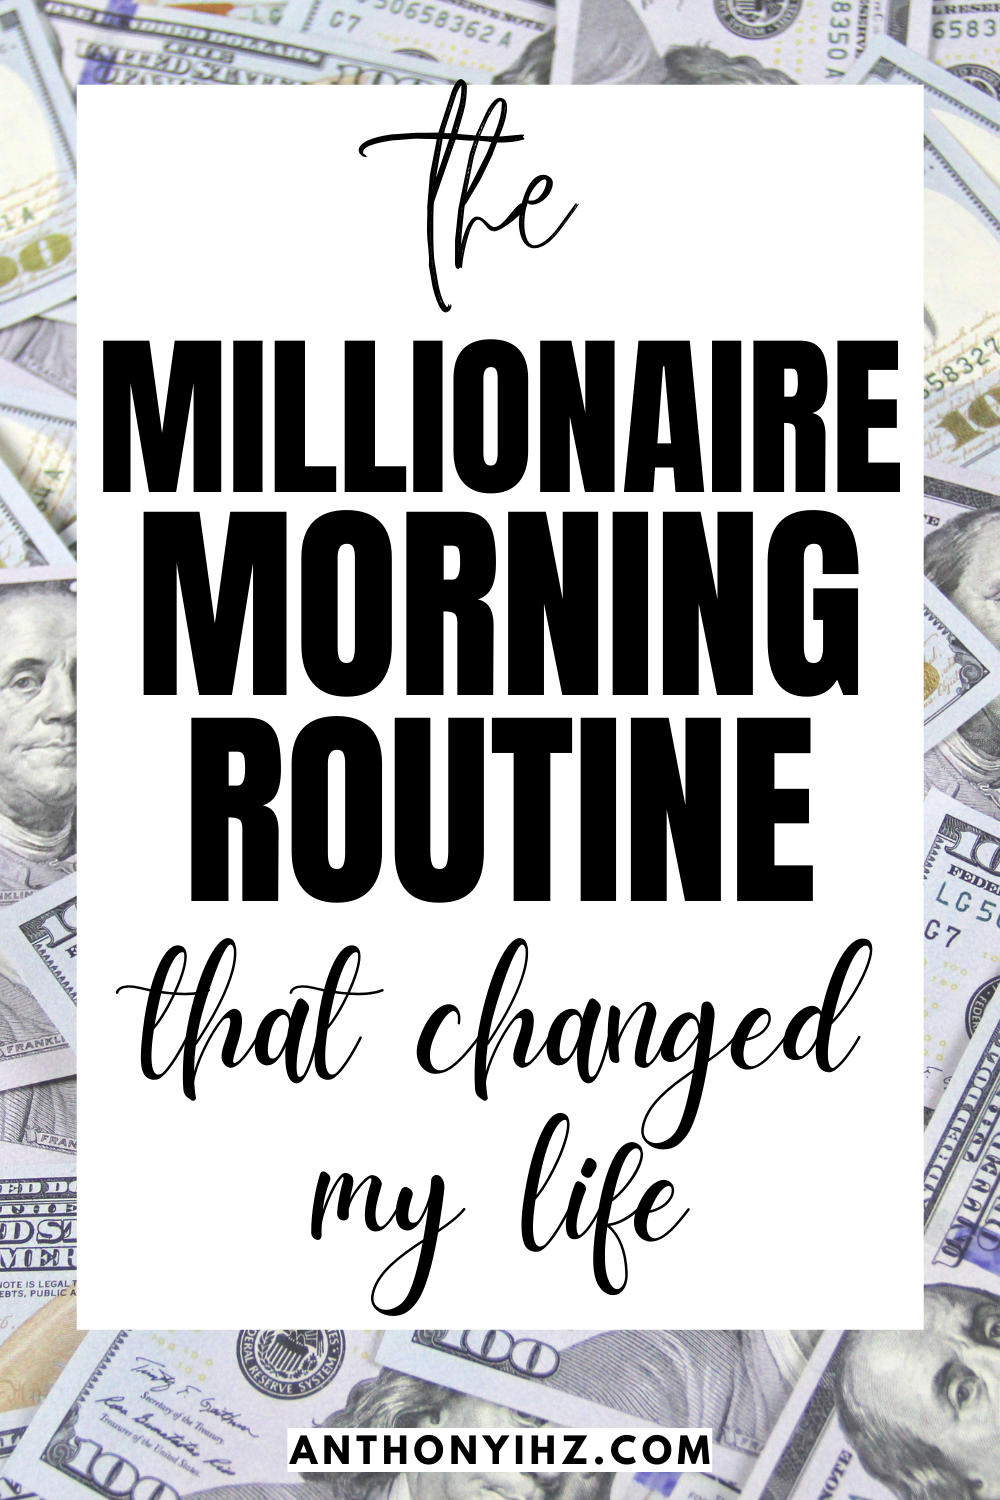 what is a millionaire morning routine and why is it important